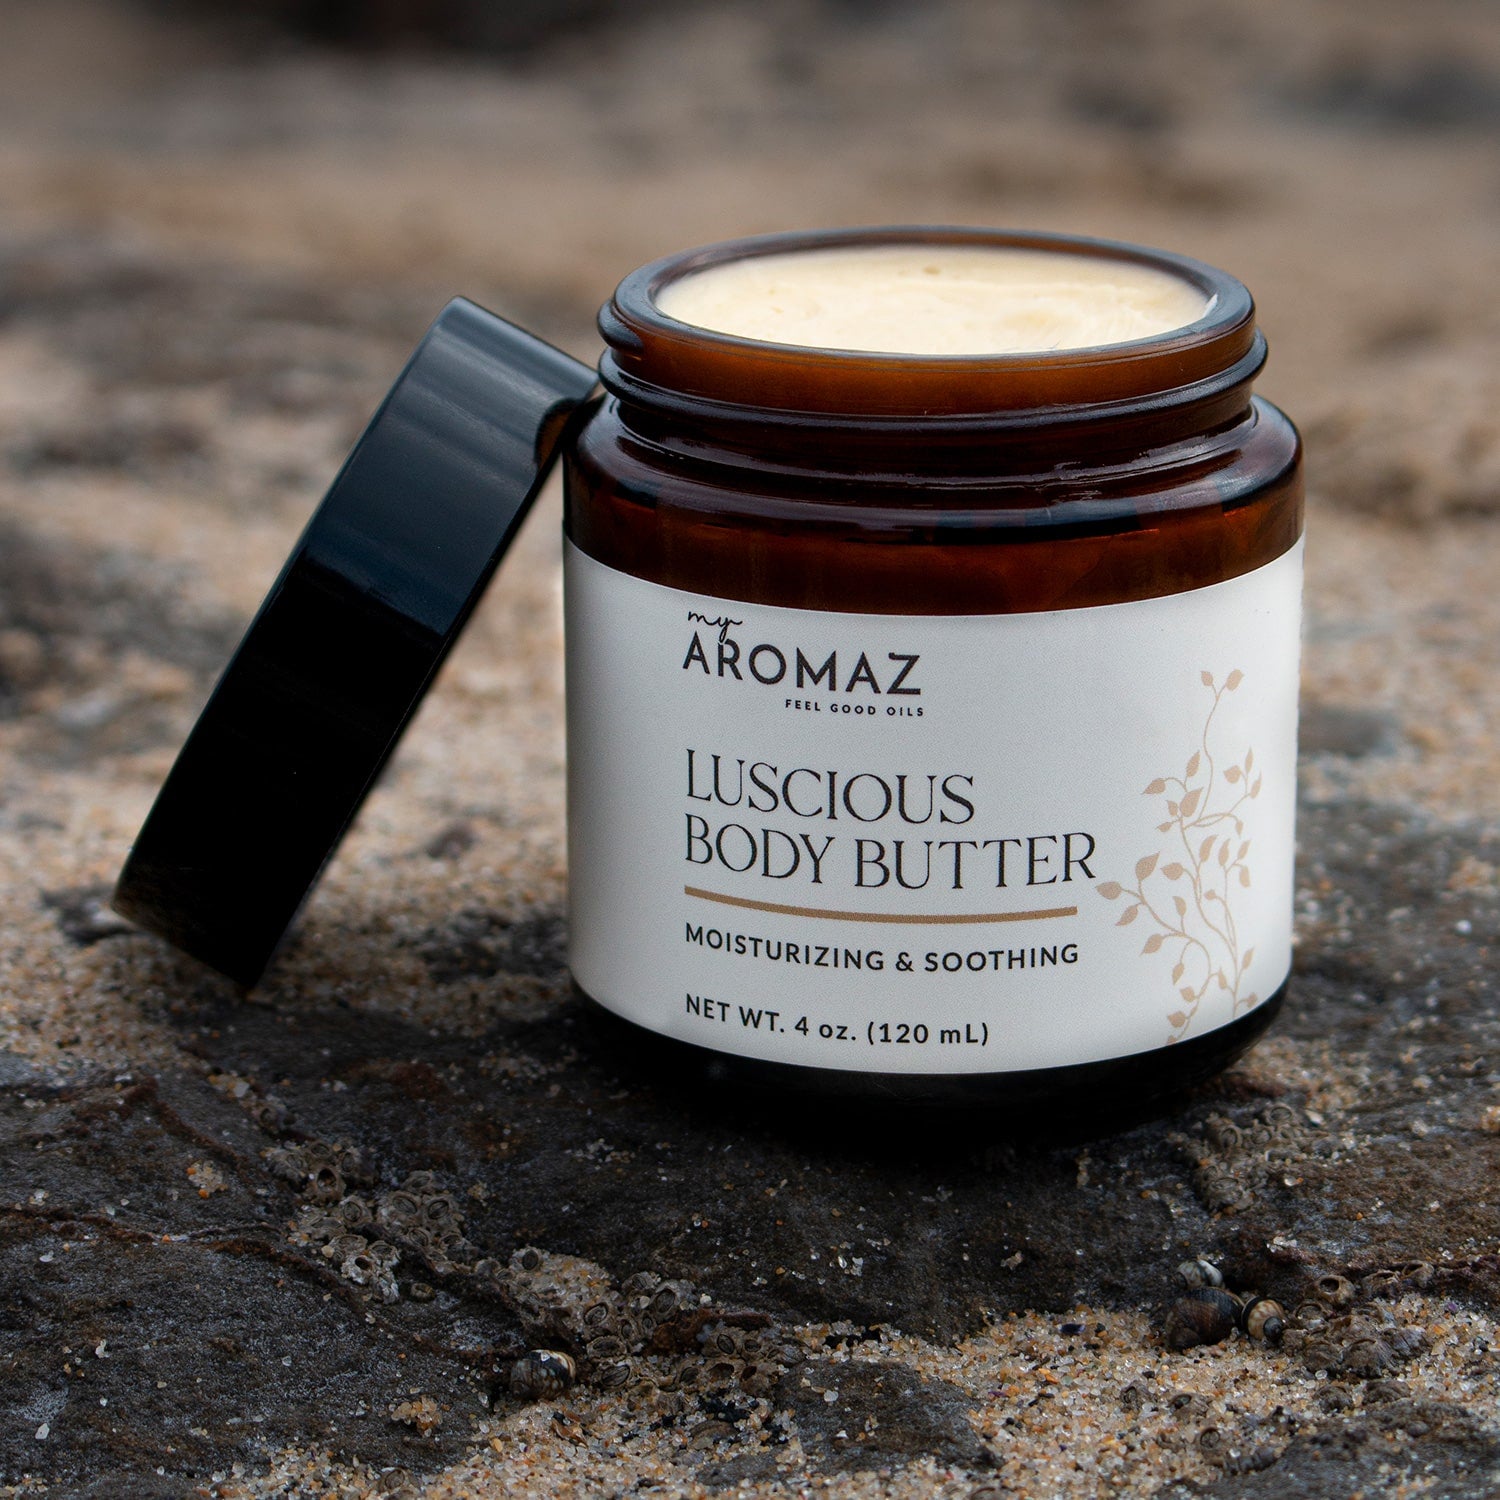 Luscious Body Butter with shea butter